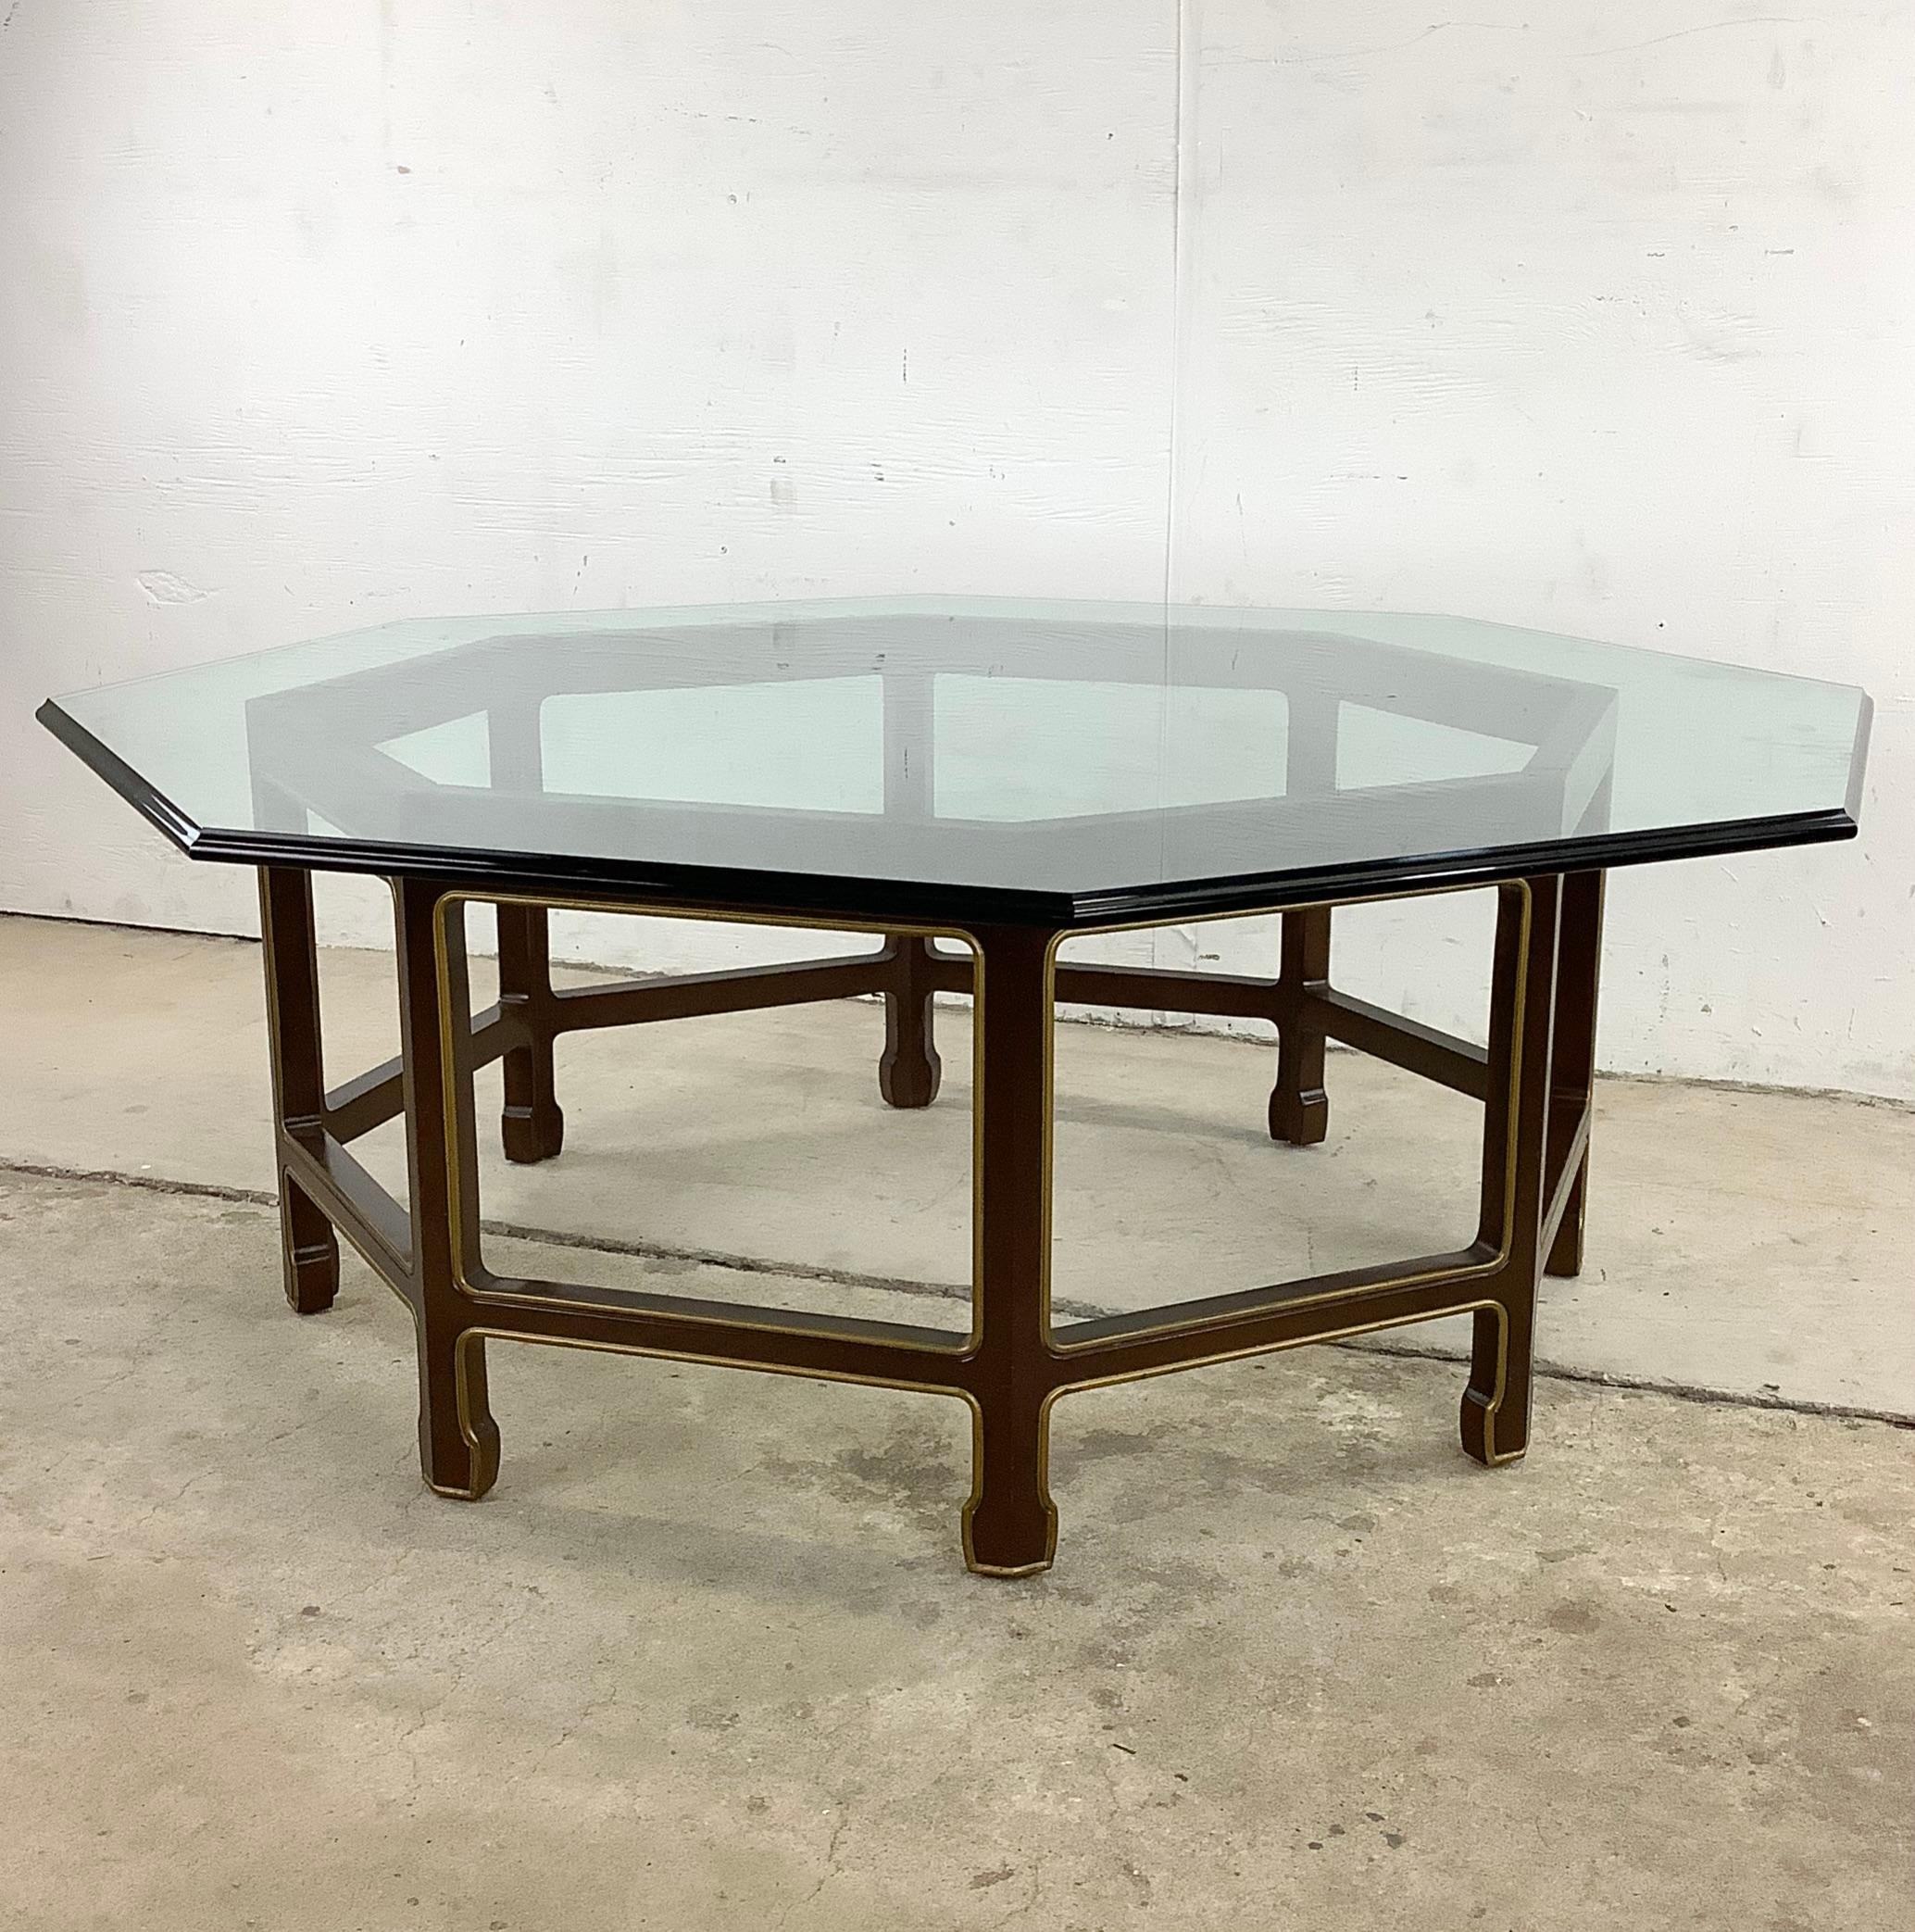 This stunning vintage modern octagonal coffee table features unique Baker style lacquer design and is topped with thick beveled glass. The eight-sided configuration of this striking Kindel Furniture attributed coffee table makes this an eye-catching